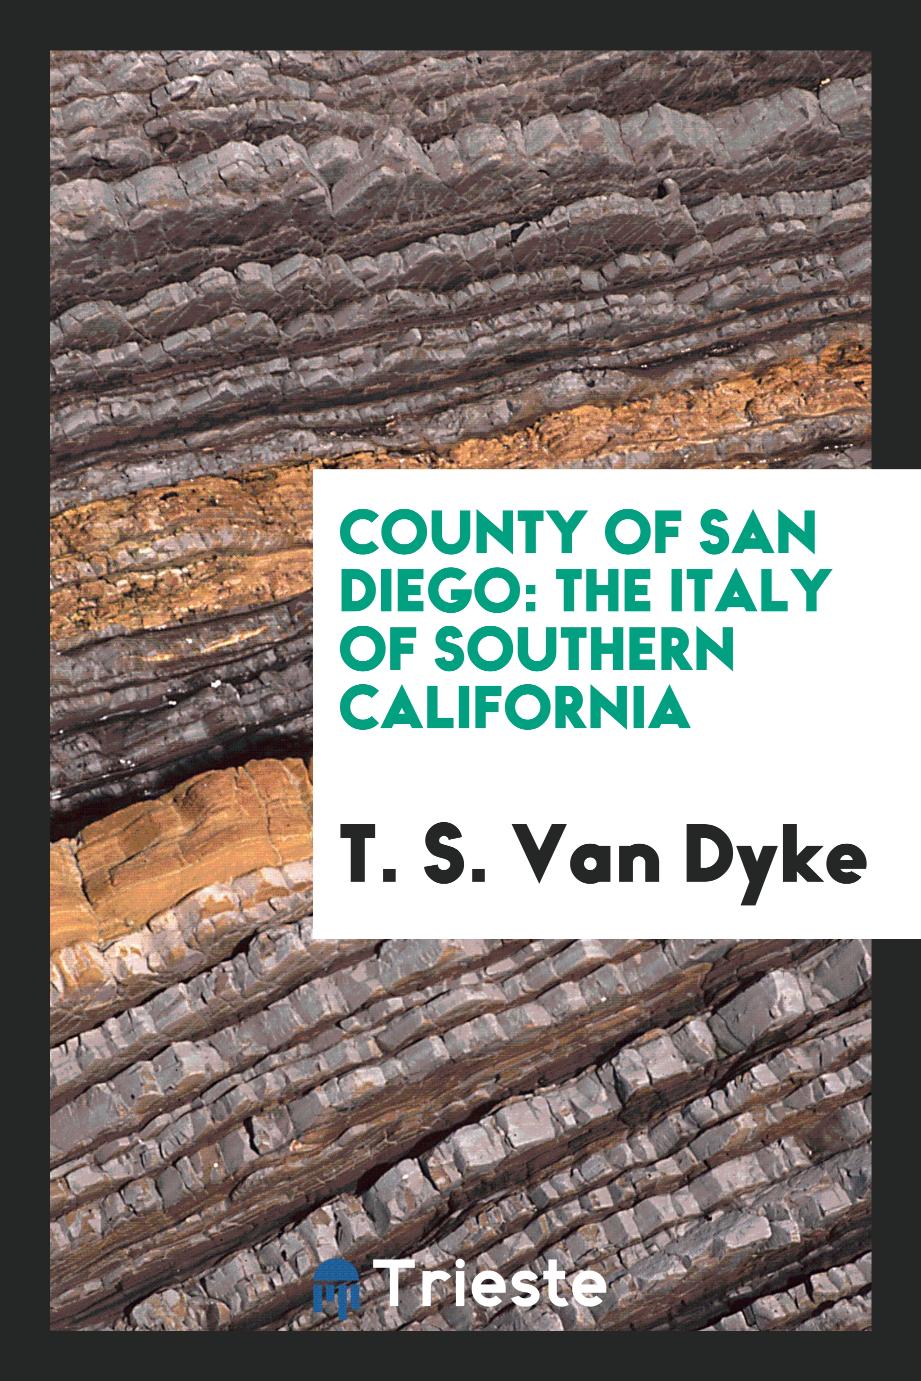 County of San Diego: The Italy of Southern California